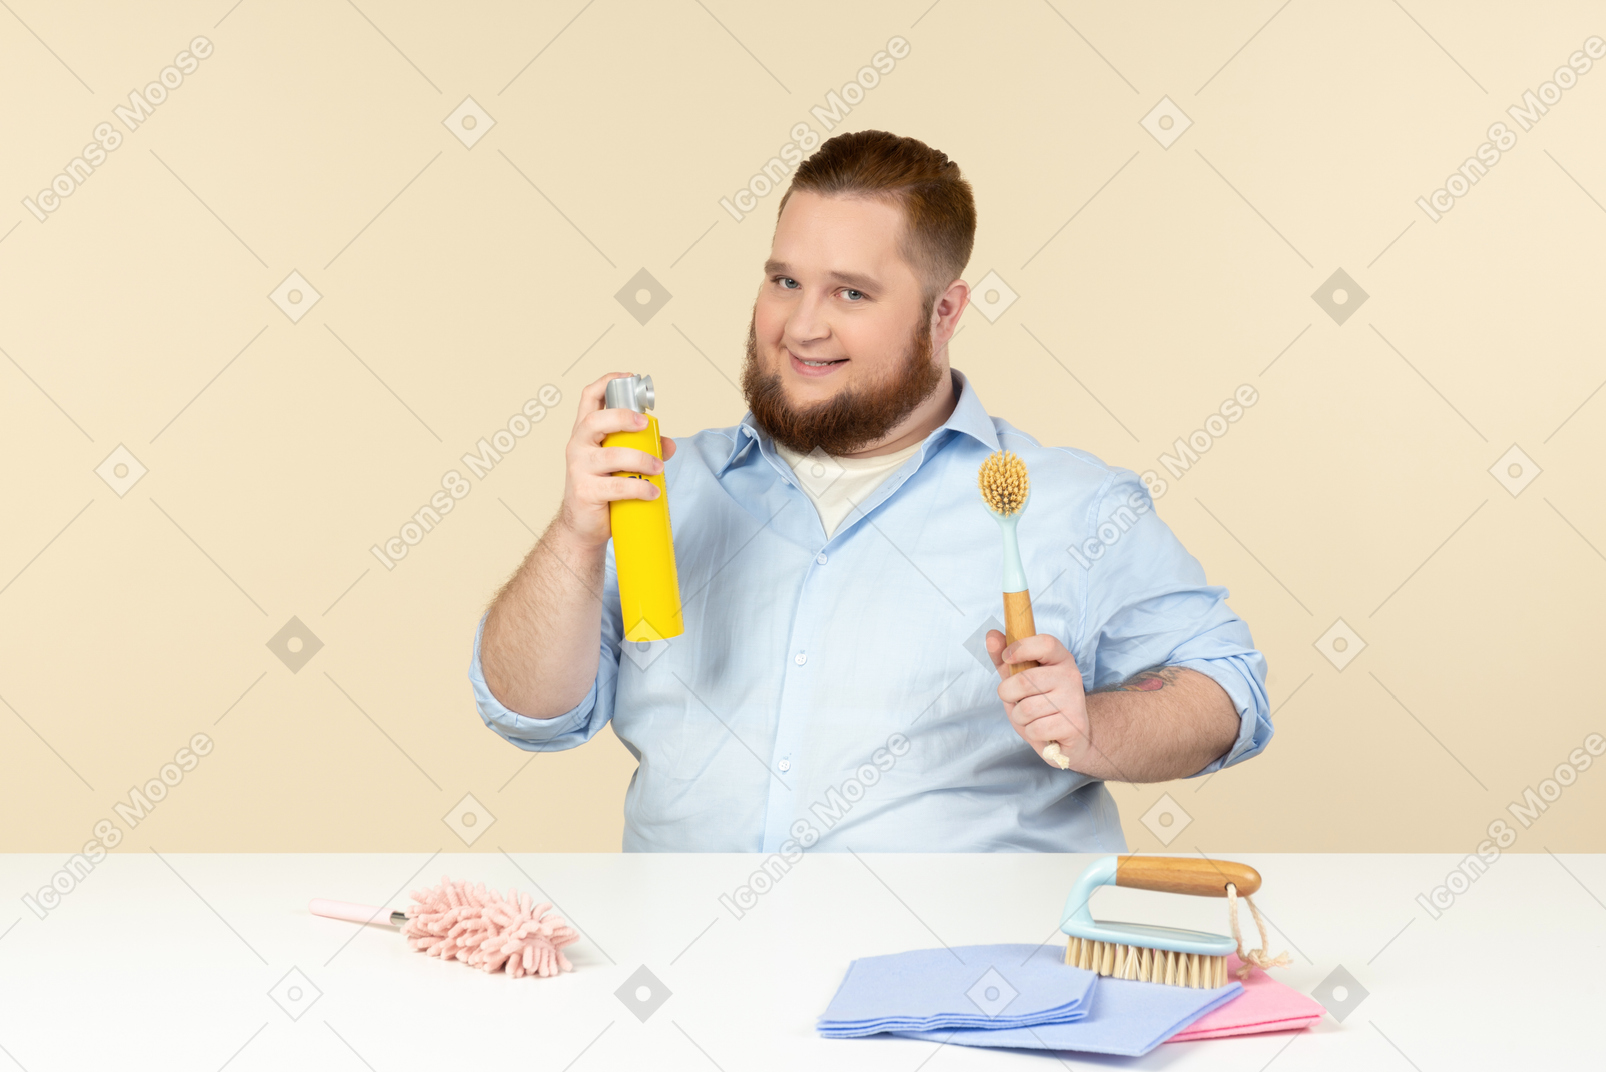 Laughing young overweight househusband holding cleaning spray and rags